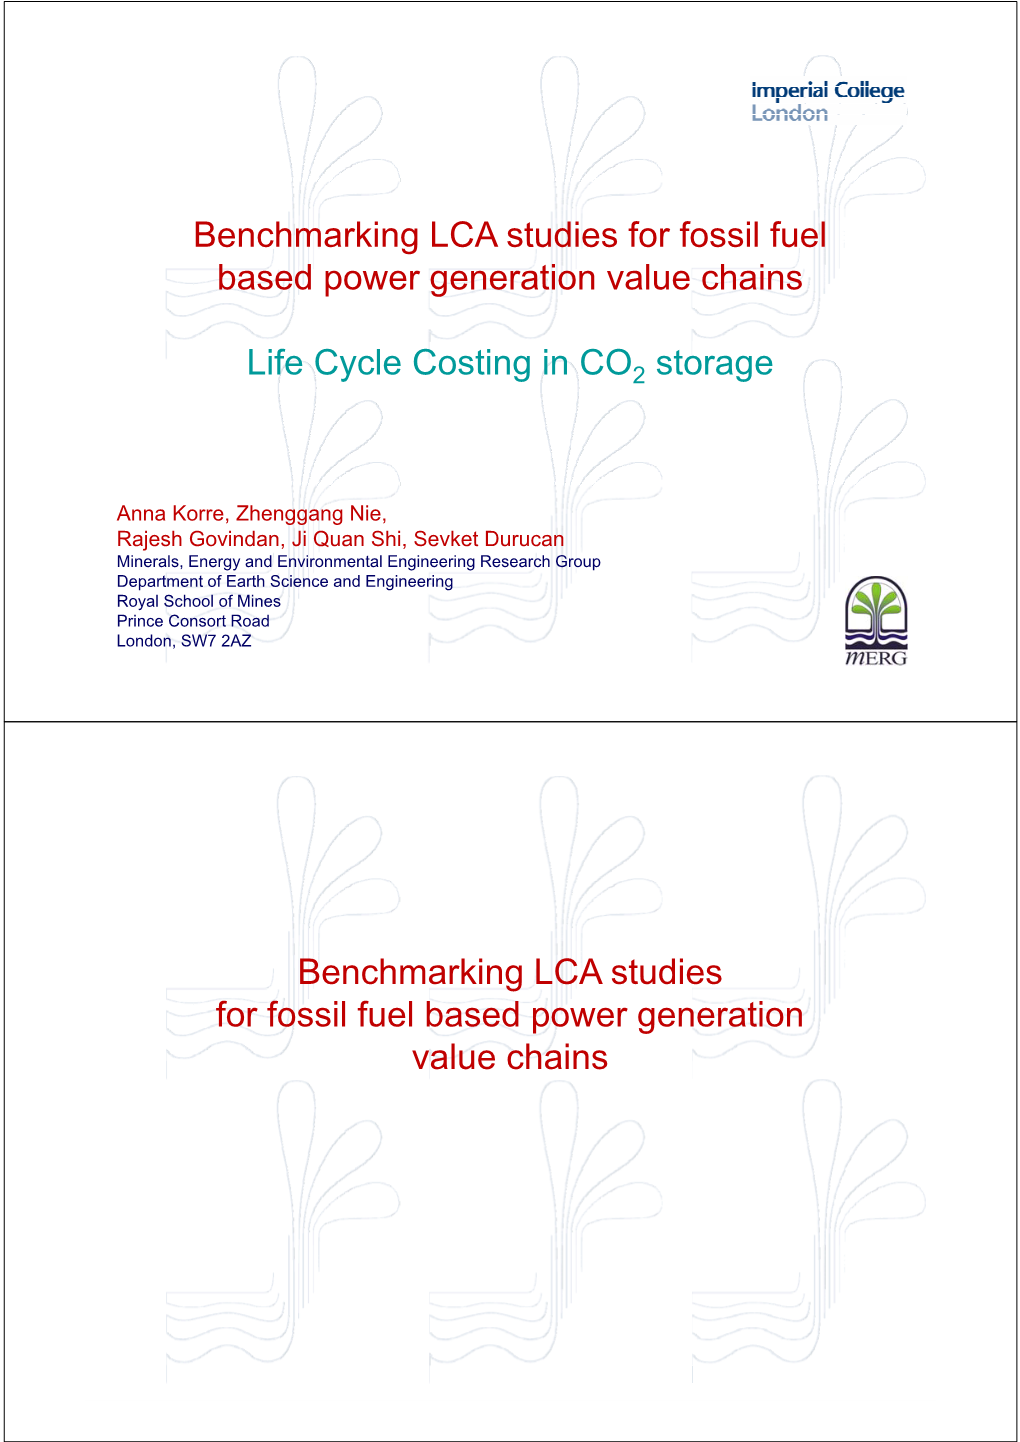 Benchmarking LCA Studies for Fossil Fuel Based Power Generation Value Chains